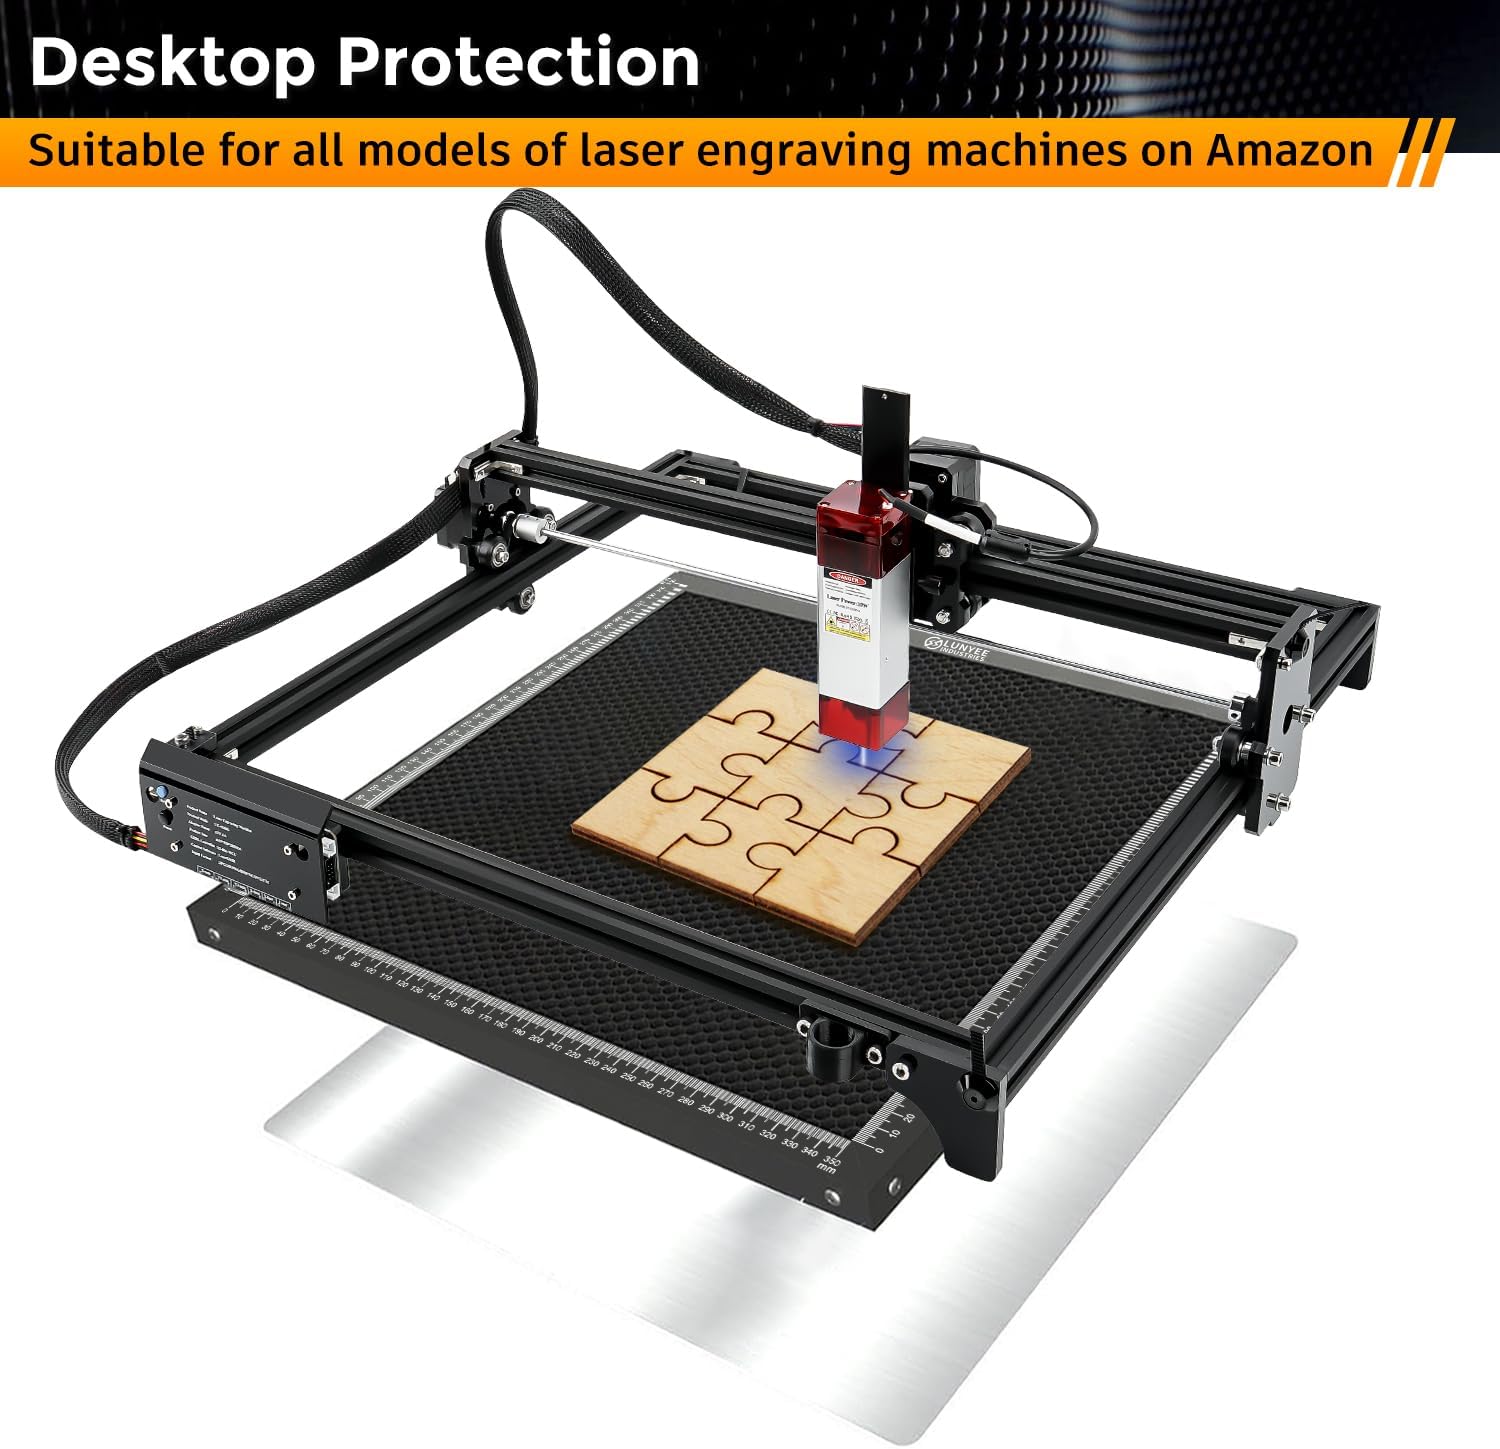 Honeycomb Laser Bed Working Table for Laser Engraver and Cutter Machine